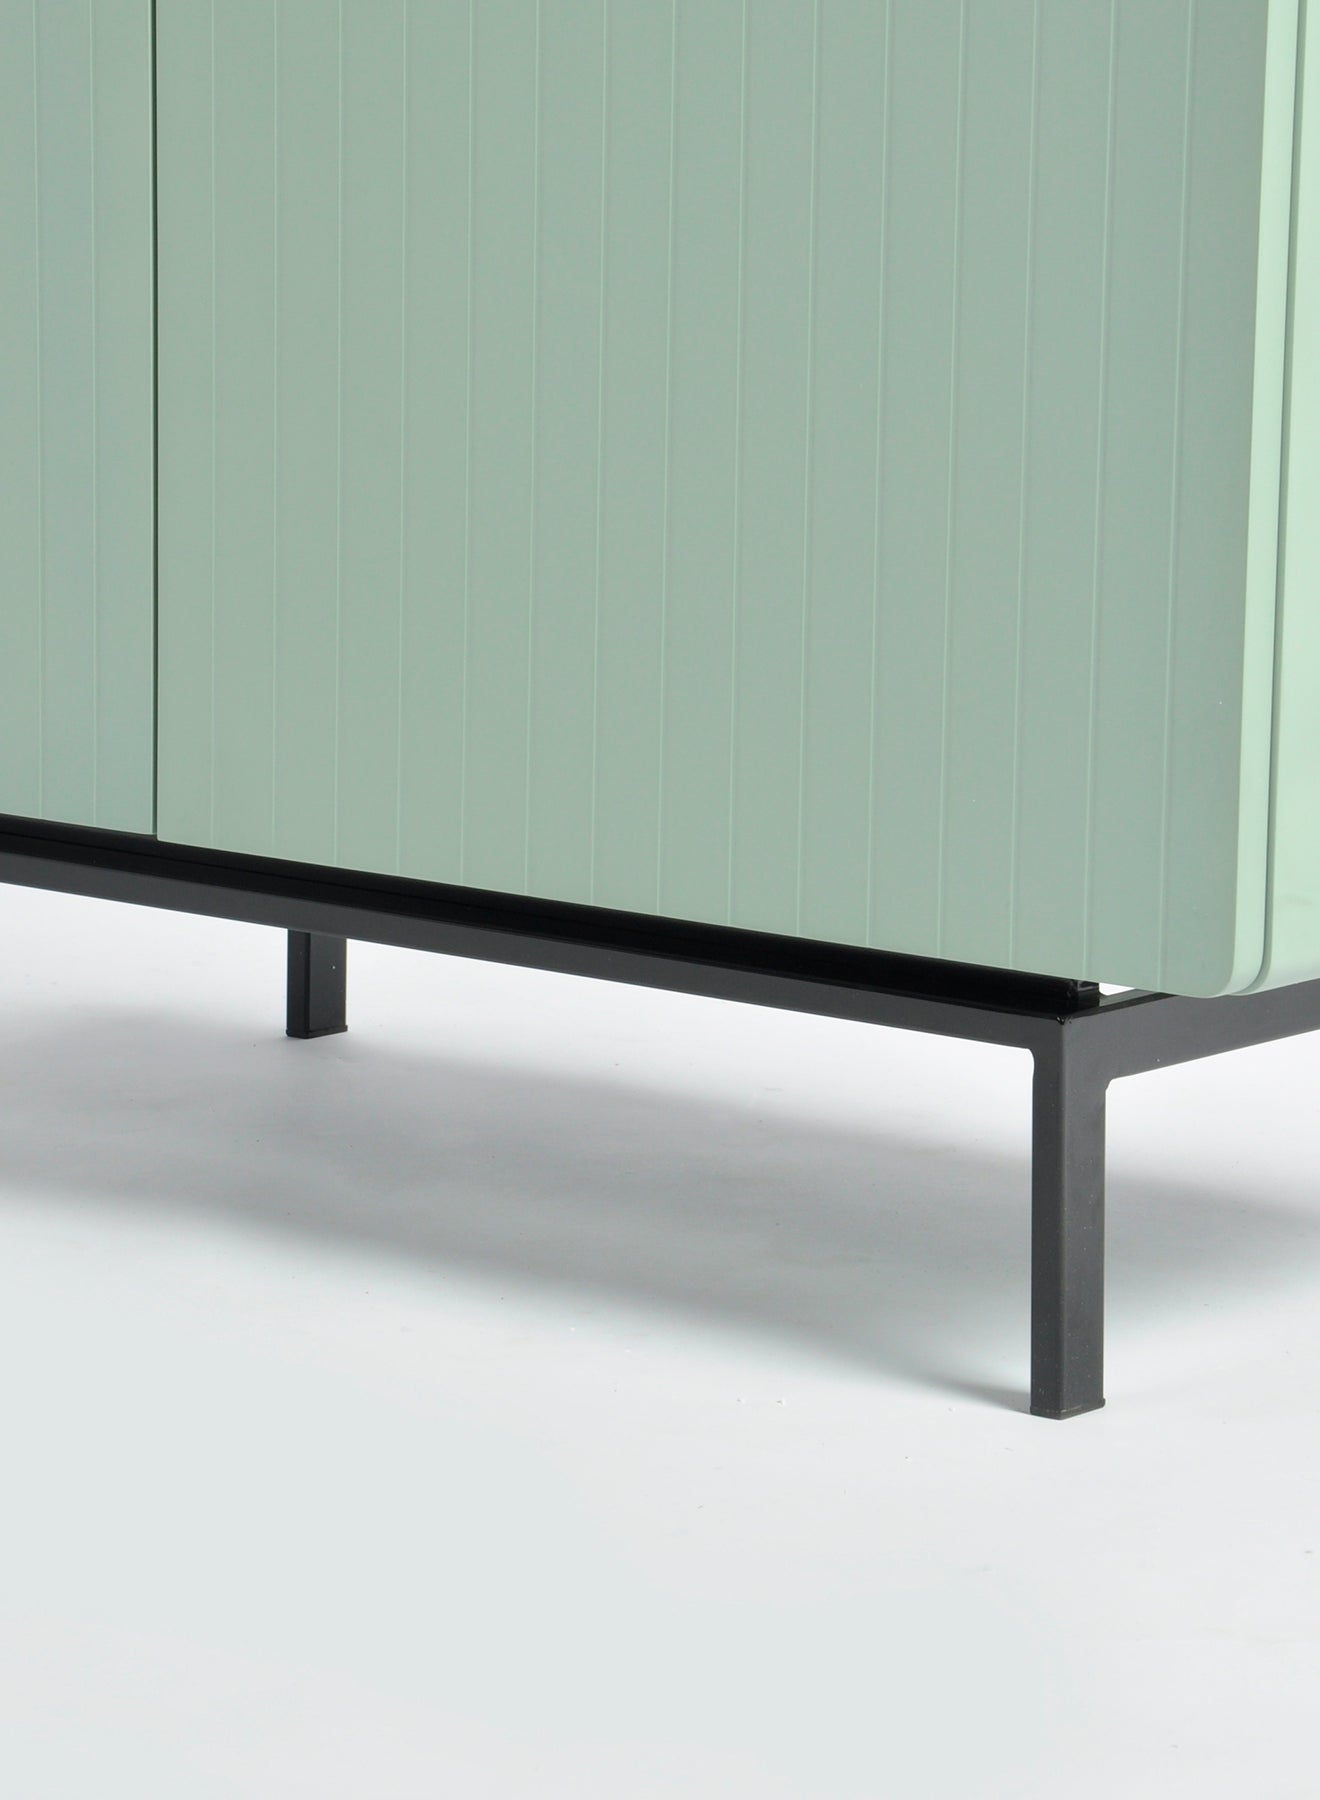 Buffet Table By In A Green Color - Size 90 X 41 X 127 - Cabinet For Storage 